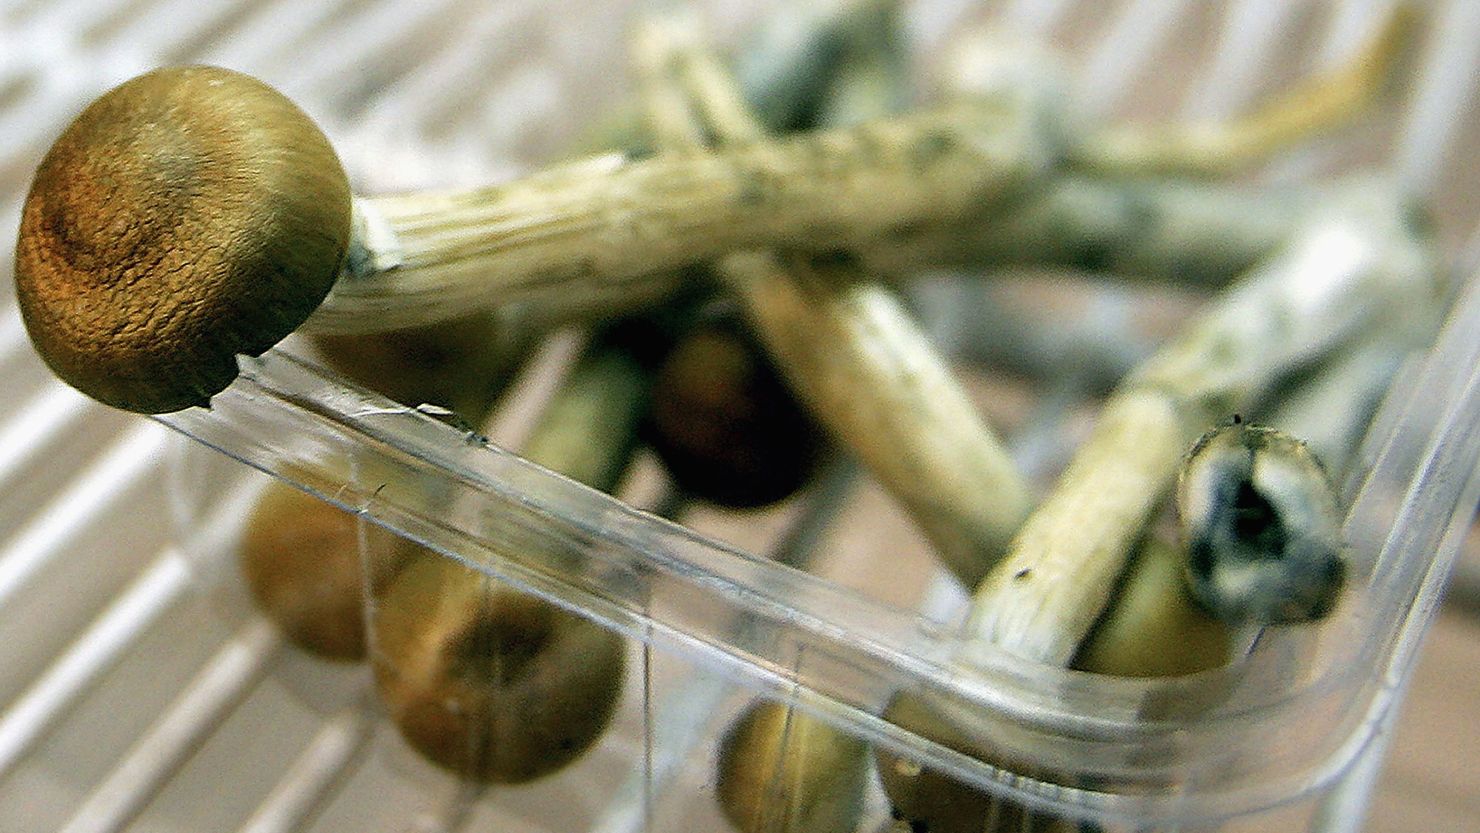 Magic mushrooms won't get you arrested, at least not for a day or two. 